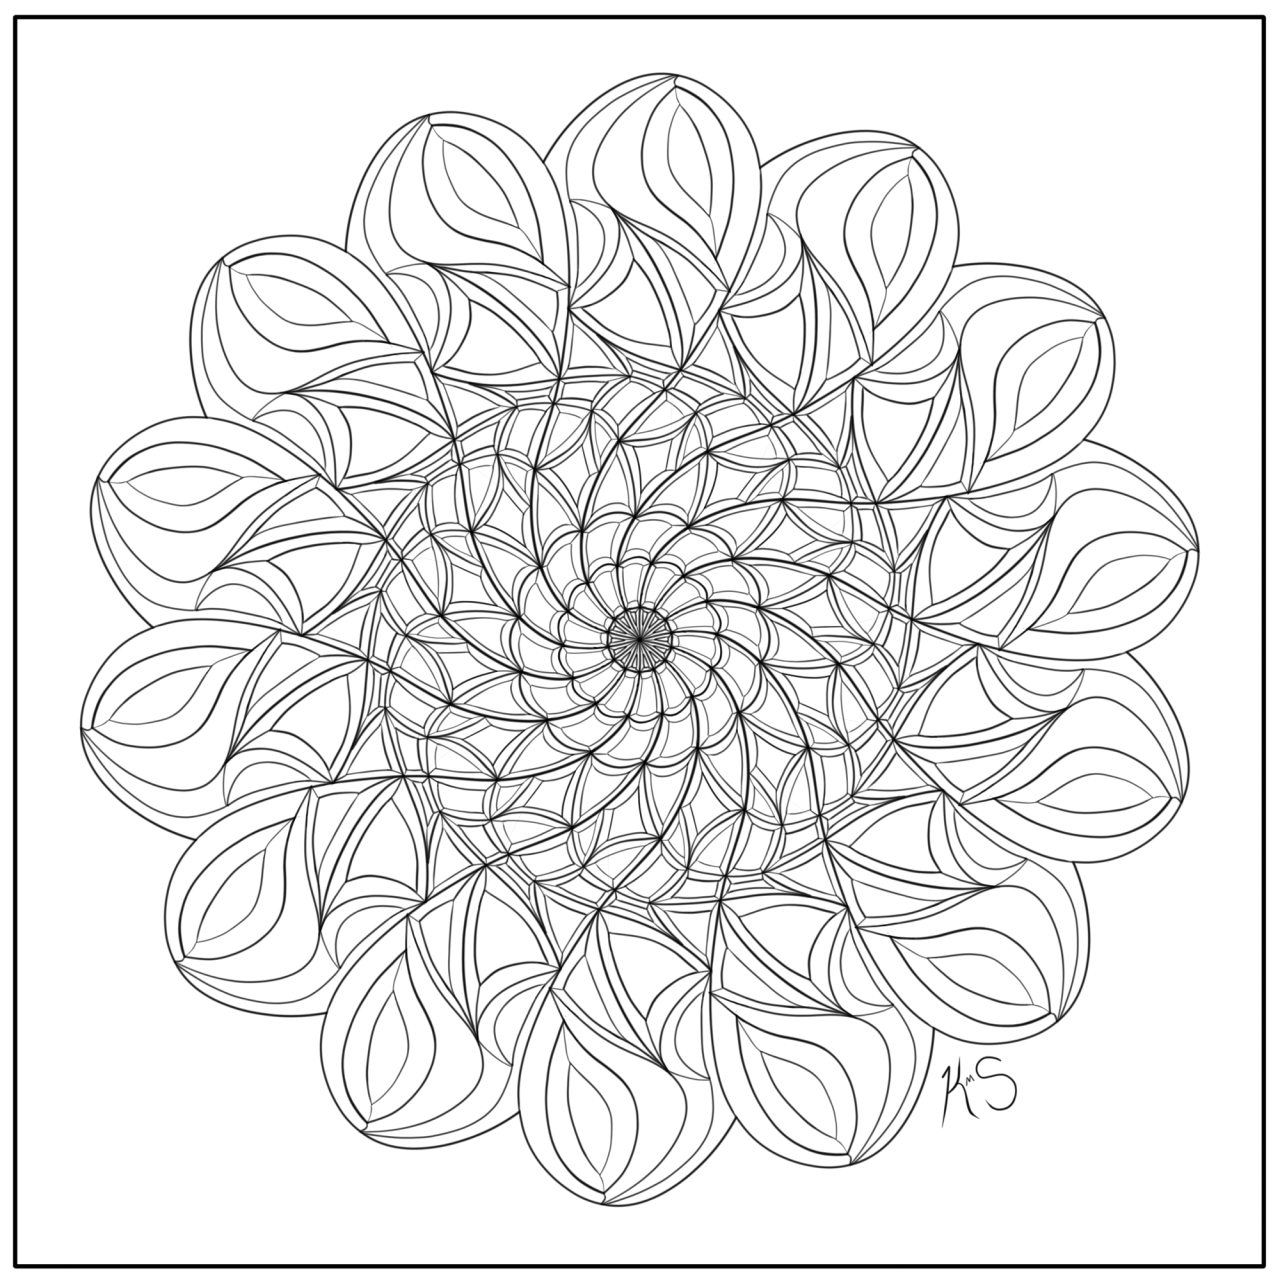 Mandala Relaxation Coloring Page - Coloring Home